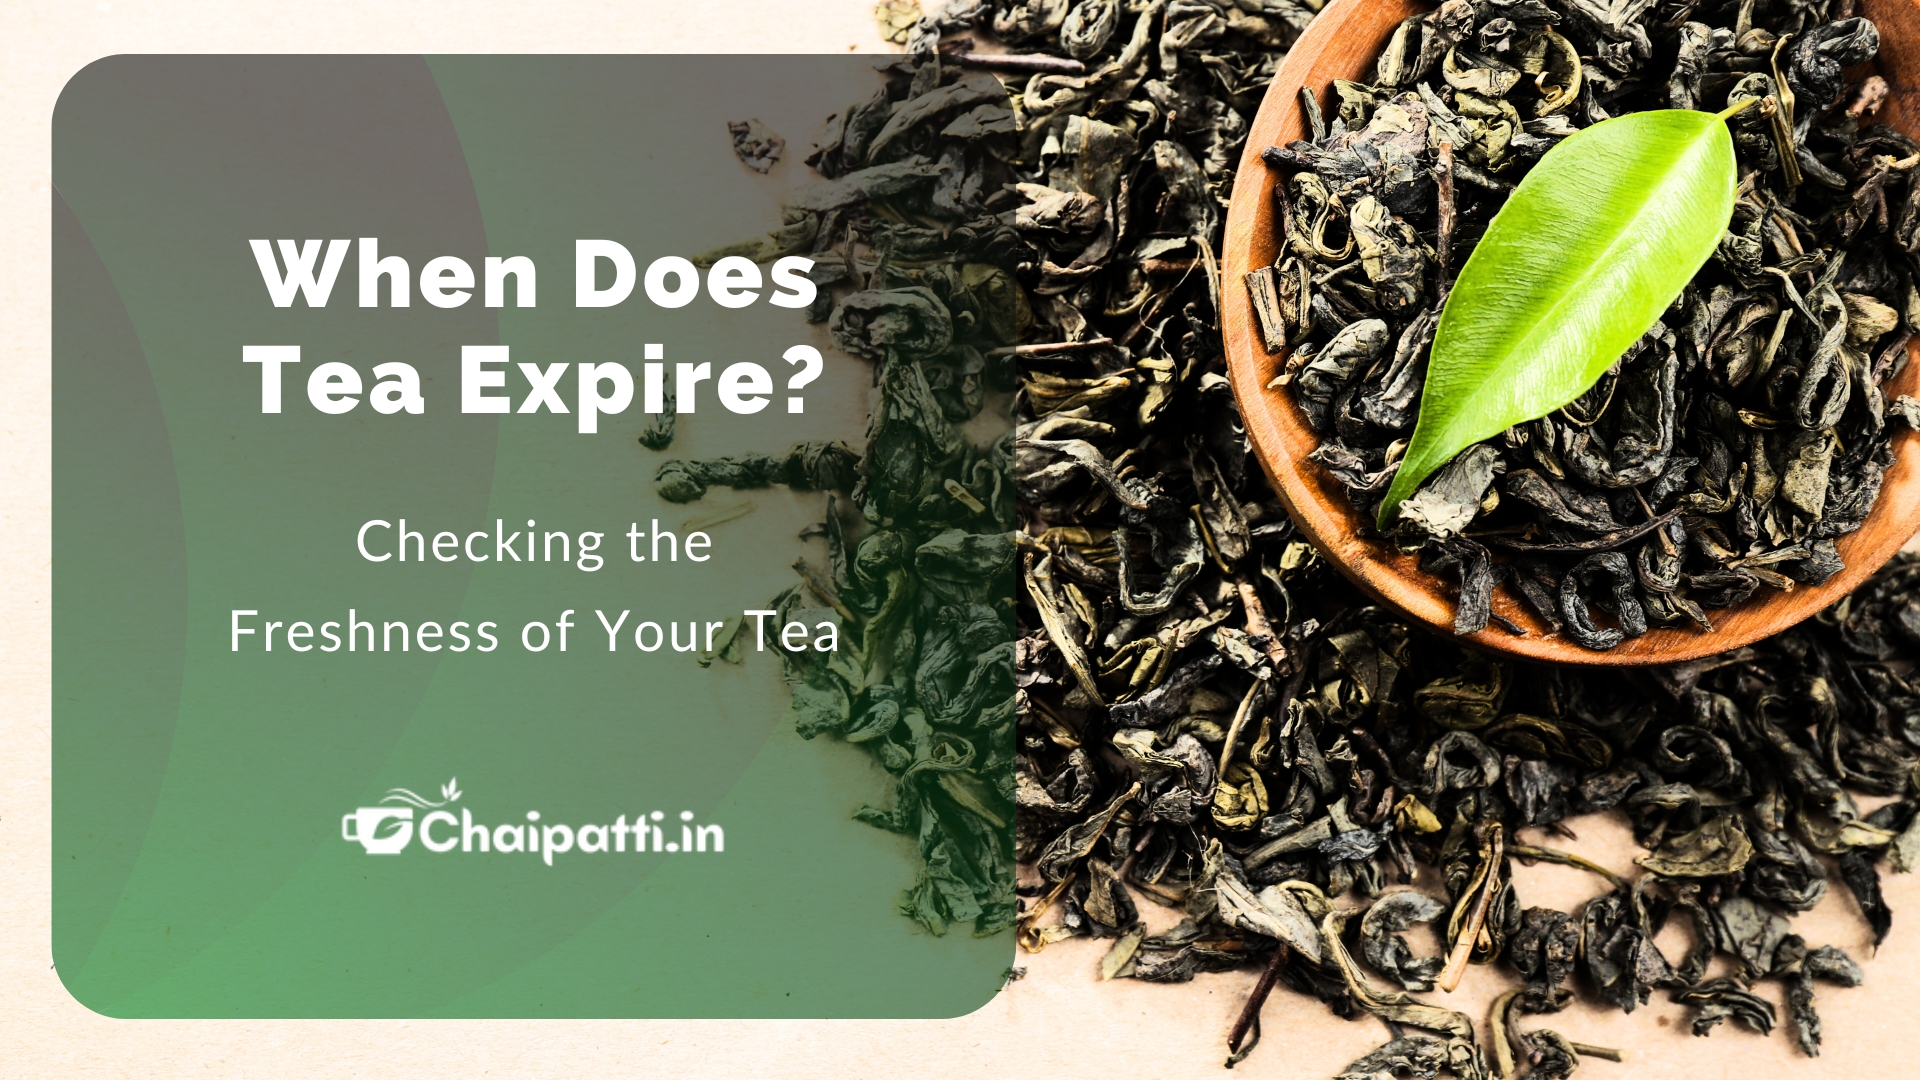 When Does Tea Expire? Checking the Freshness of Your Tea